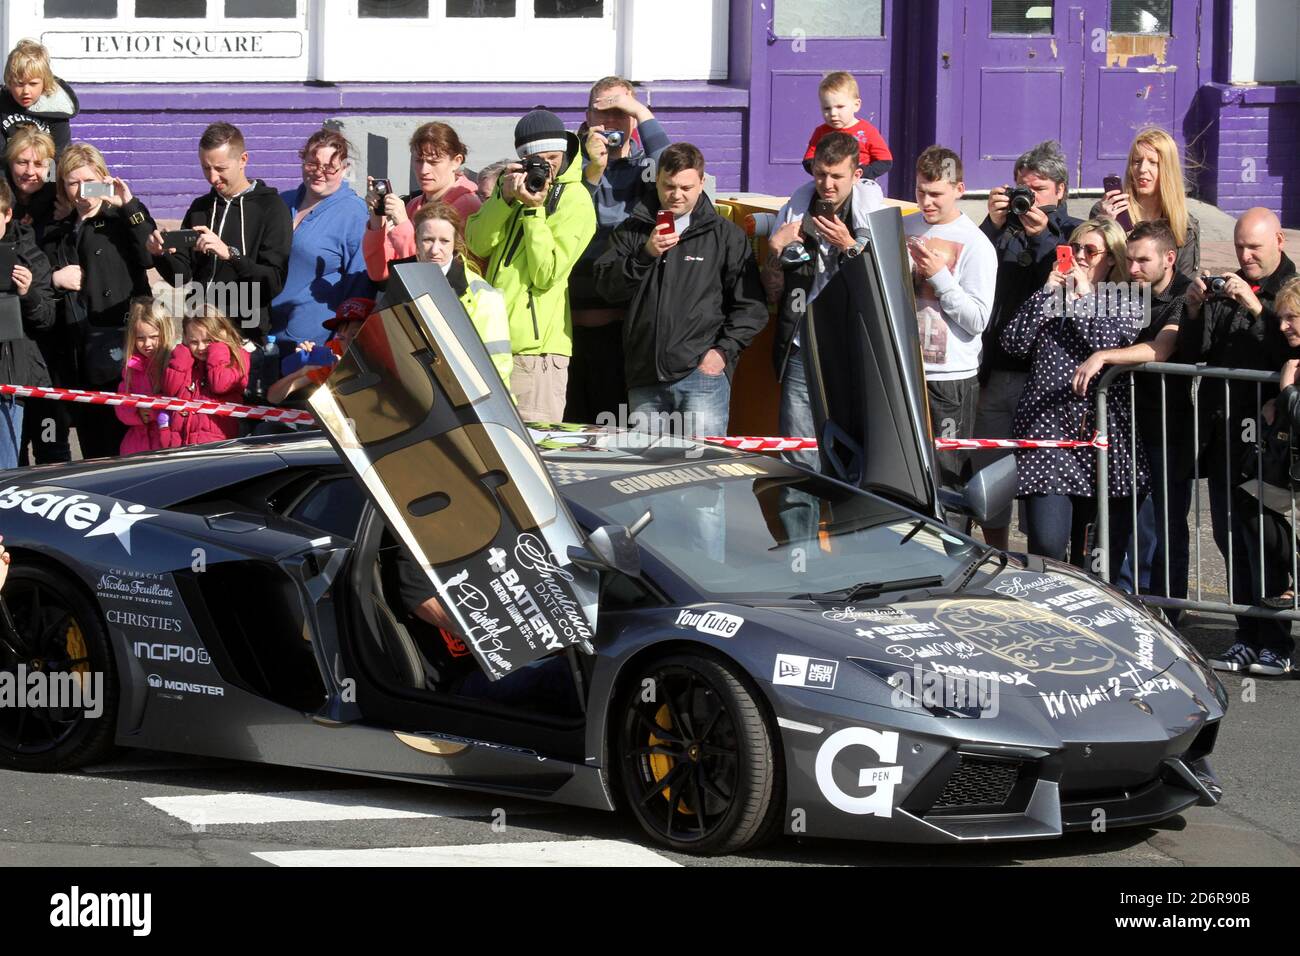 Gumball 3000 rally arrived at Glasgow Prestwick Airport, when the cars head  over to Edinbugh for the start. The Gumball 3000 Rally in 2014 had a route  from Miami, through Atlanta to